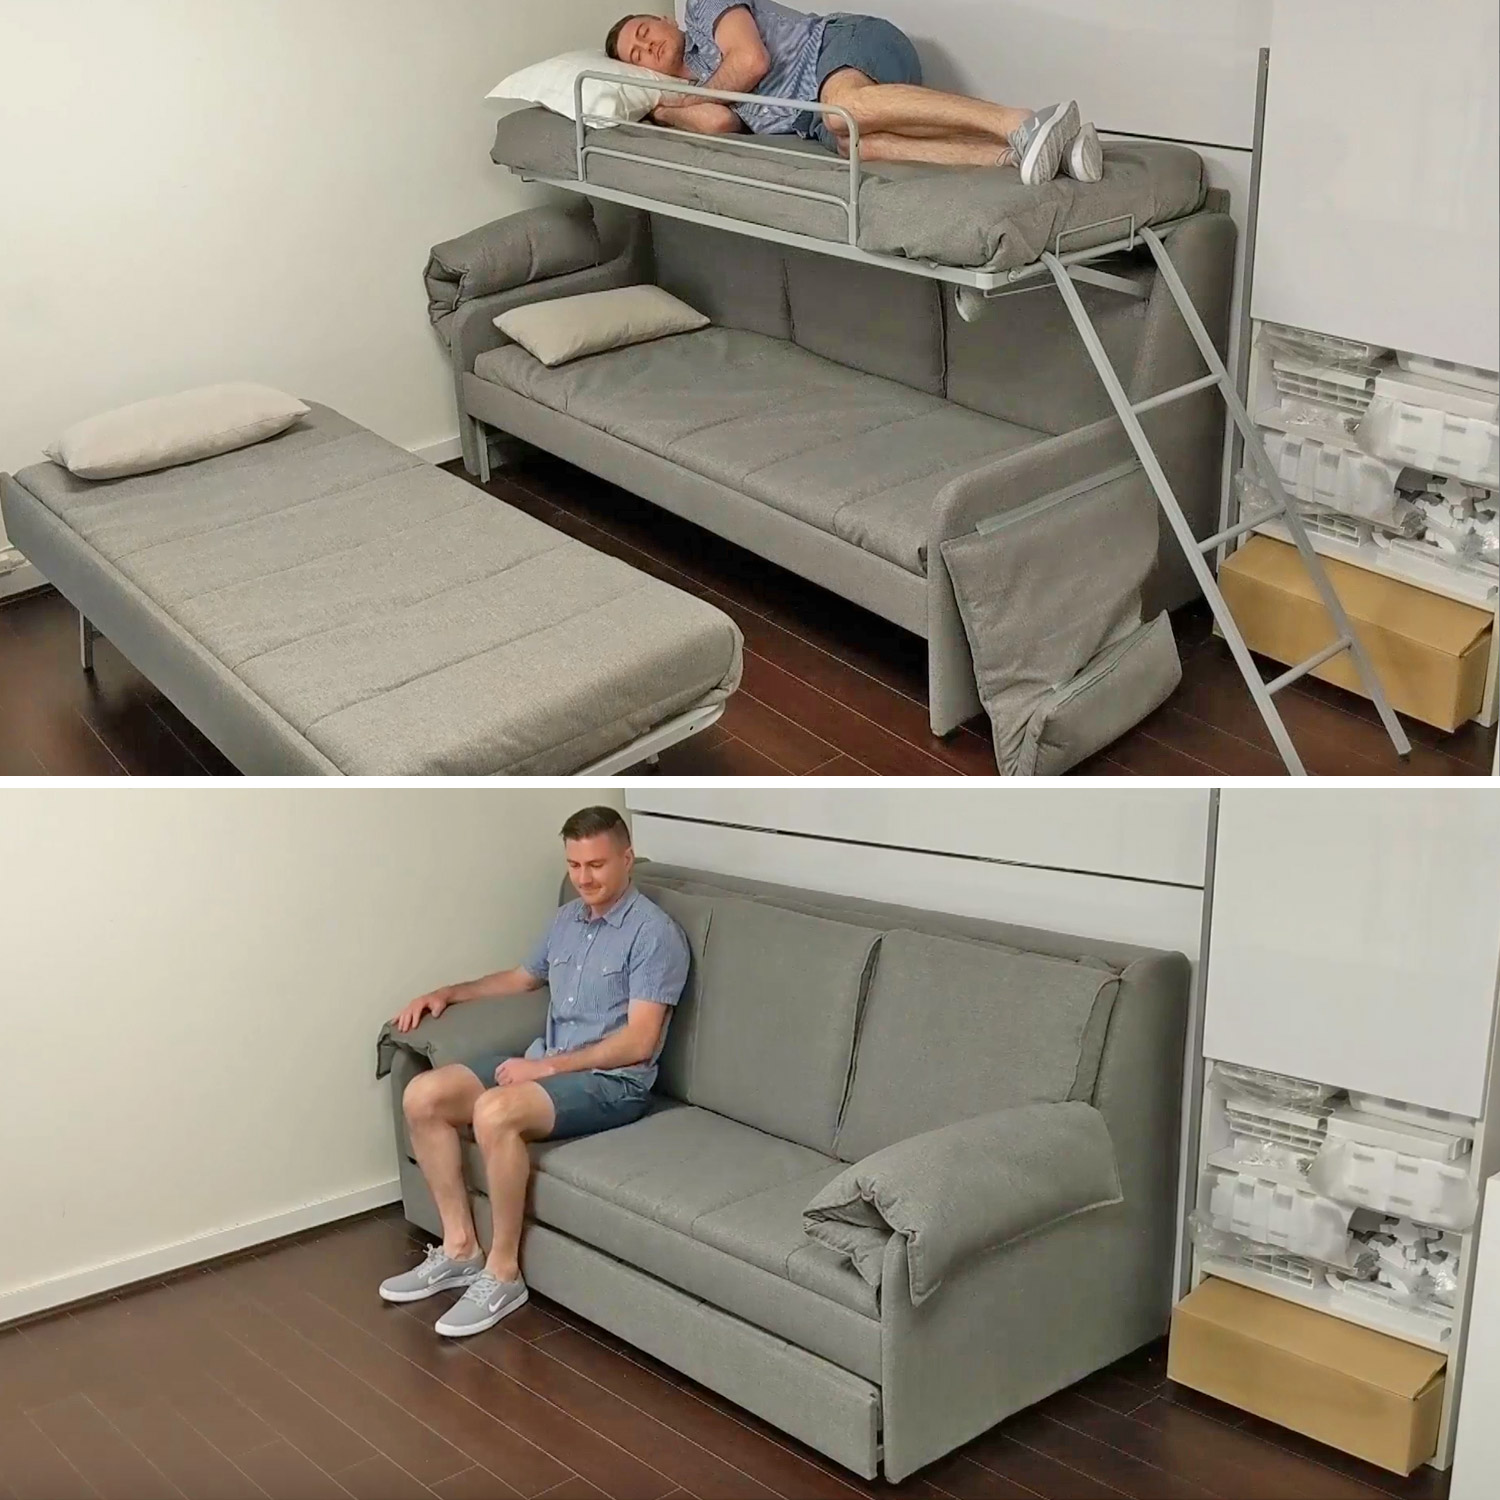 This Transforming Bunk Bed Sleeps 3 And, A Sofa That Turns Into A Bunk Bed